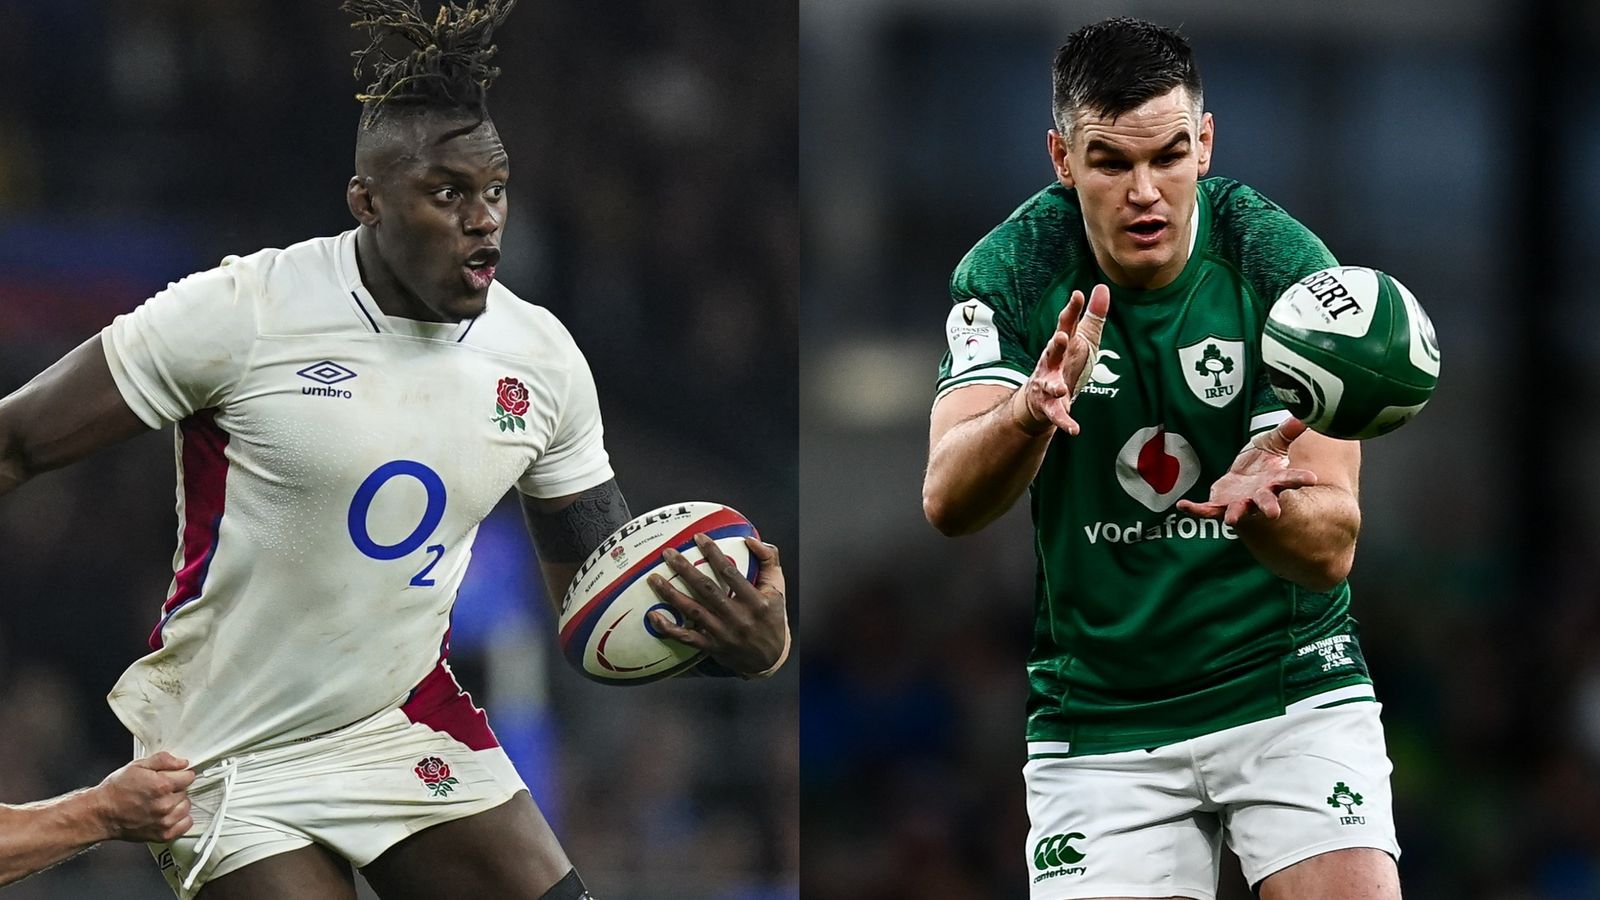 Six Nations 2022: England vs Ireland talking points preview ahead of kick-off at Twickenham